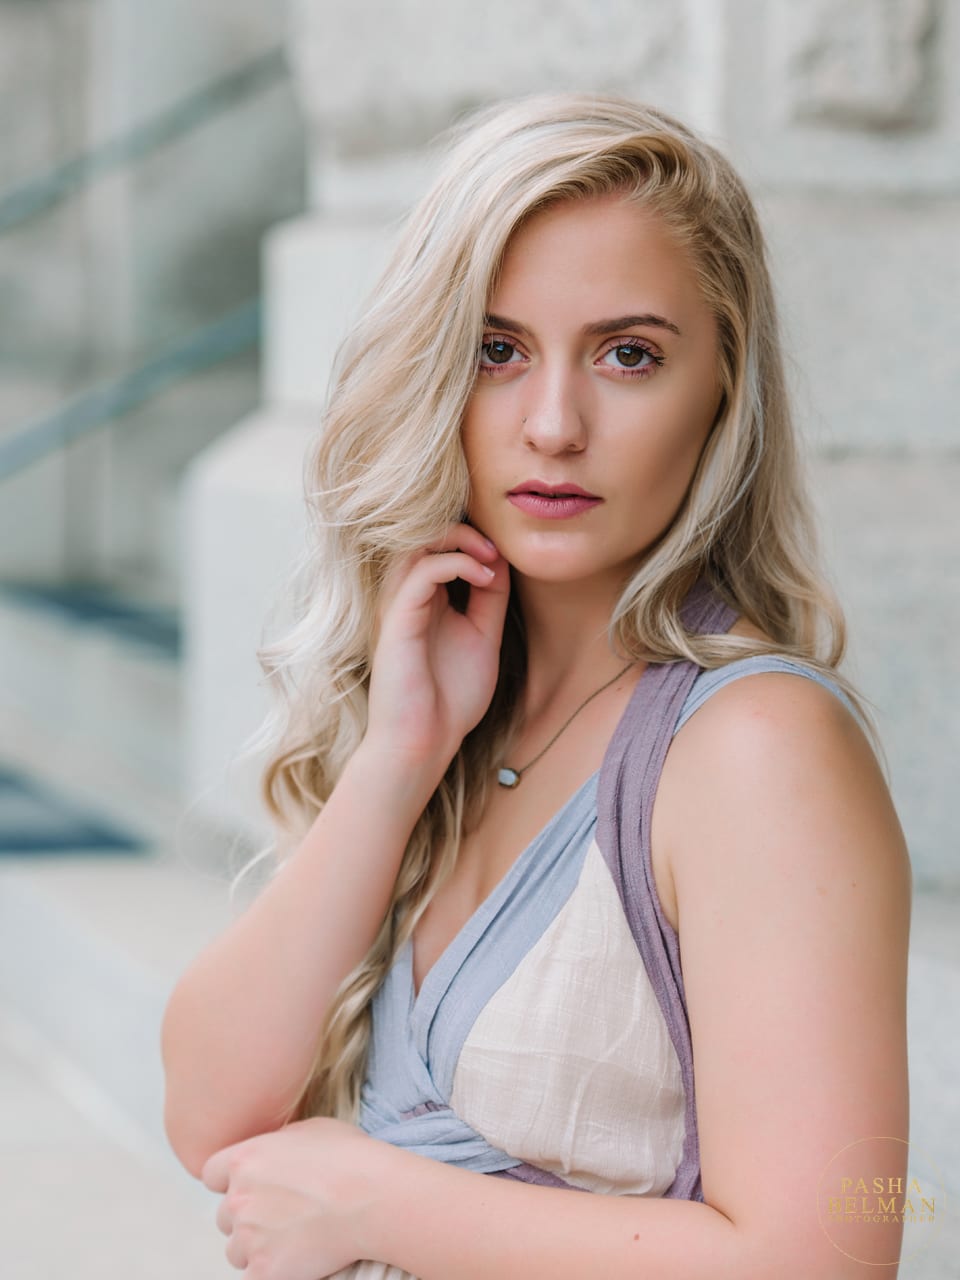 Gorgeous high school senior pictures in downtown Charleston SC by Pasha Belman Photographer